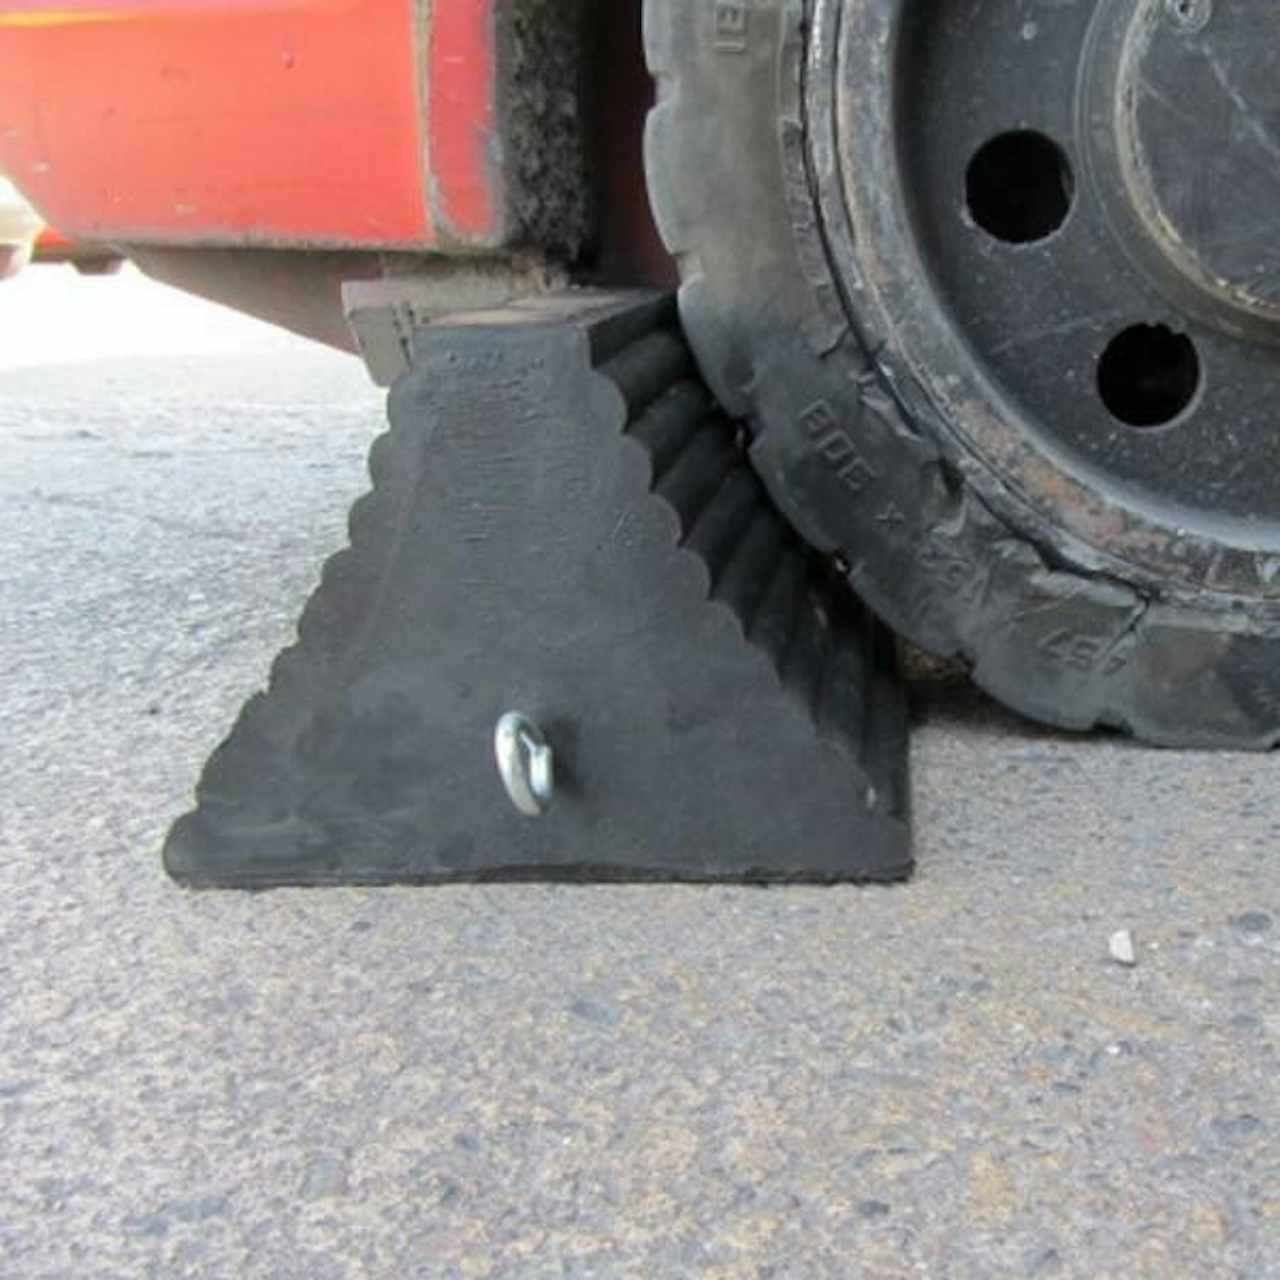 For Repairing Vehicles Or Loading And Unloading Items Heavy Duty Wheel Chocks Folding Steel Tire Slope Anti-skid Chocks 